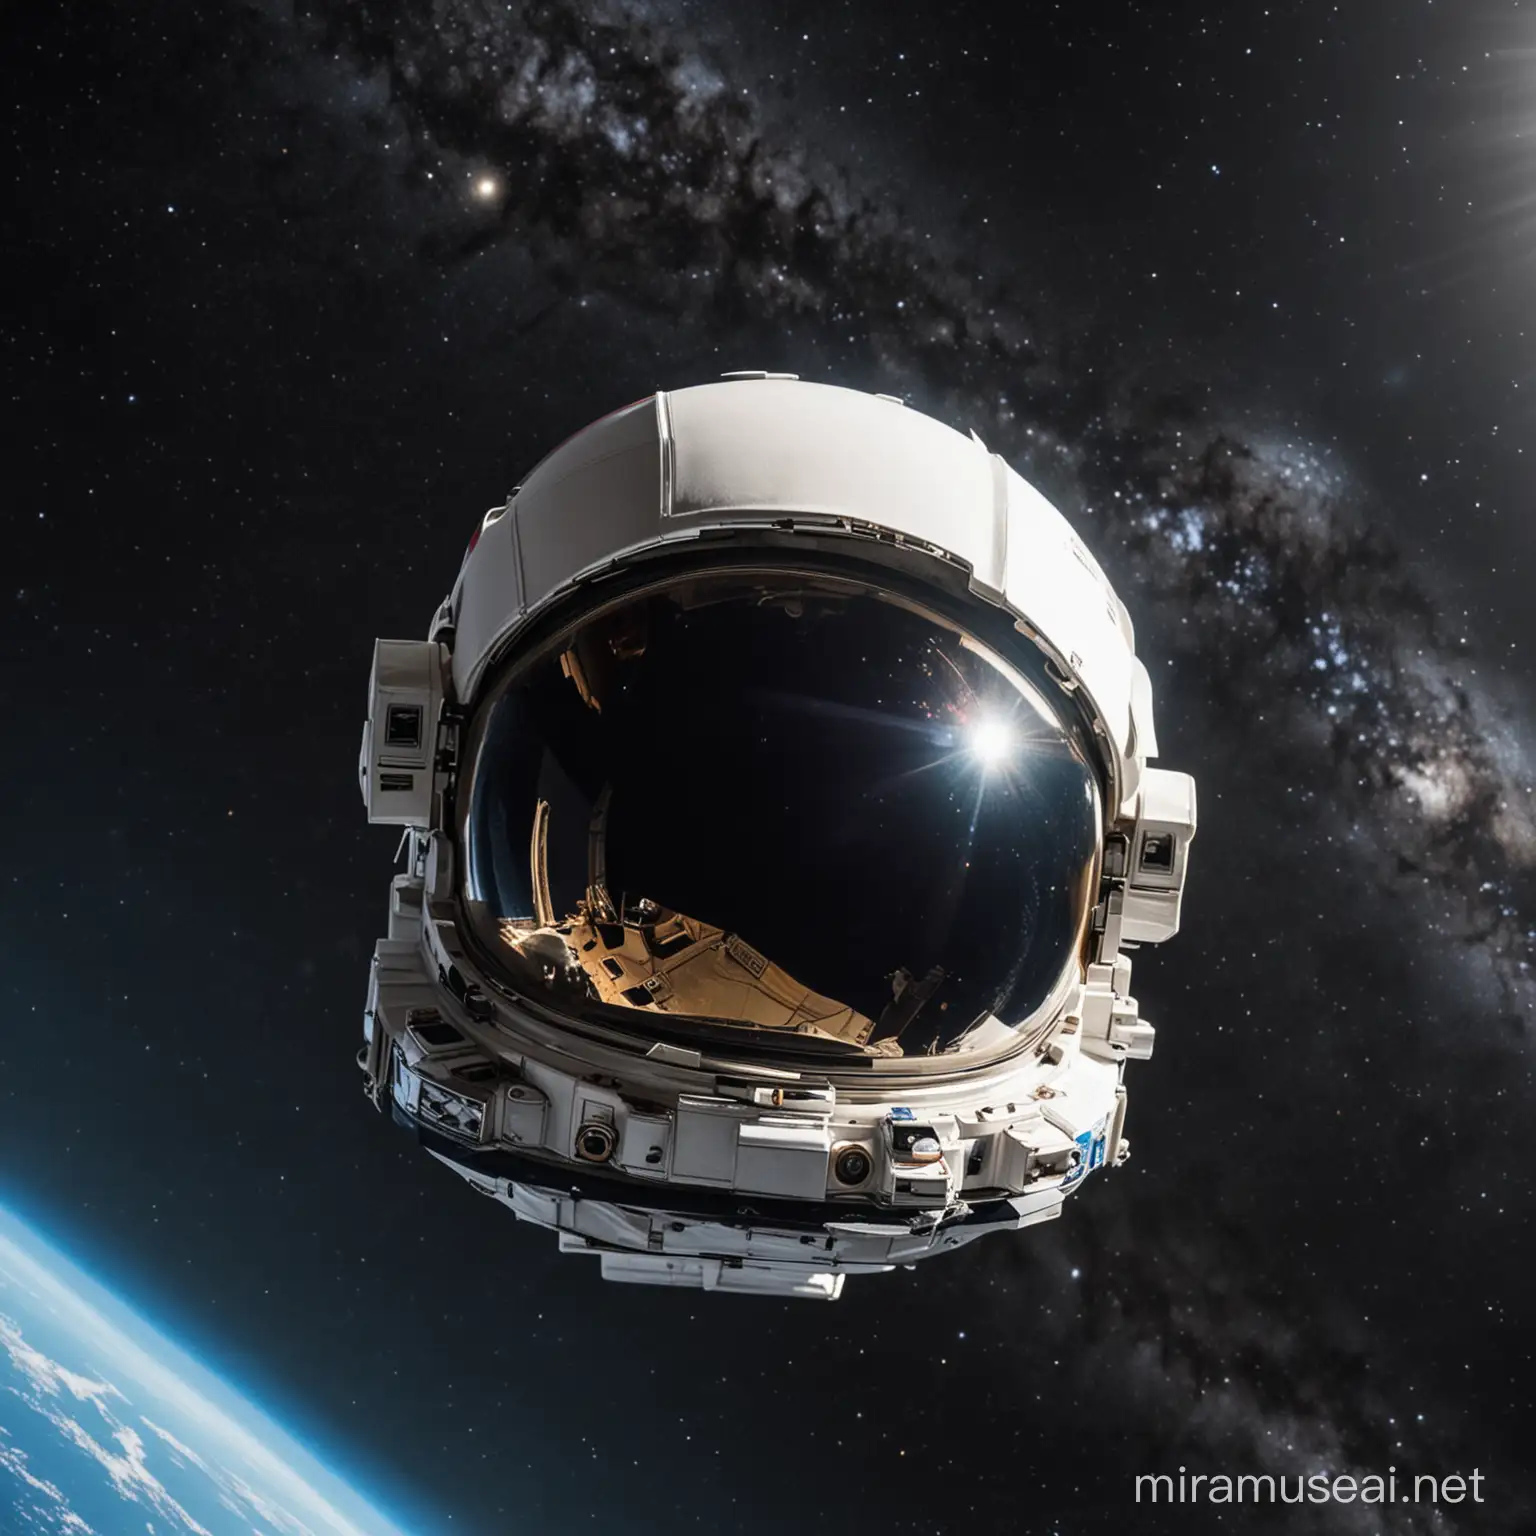 A astronaut helmet floating in space